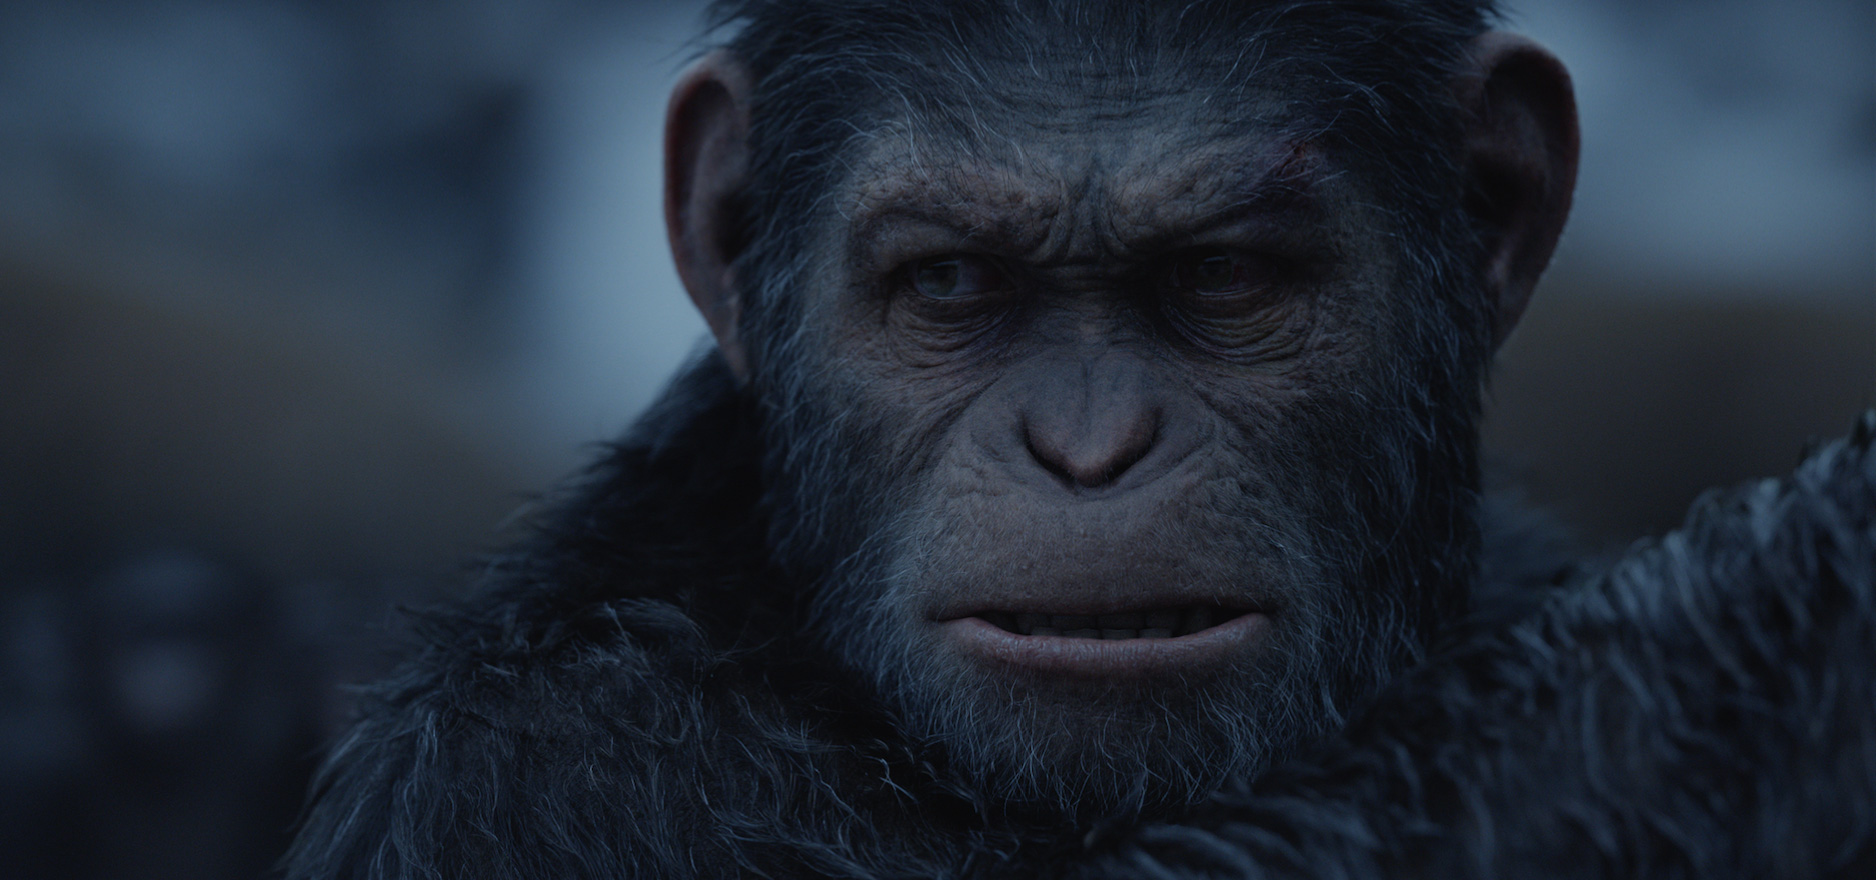 War for the Planet of the Apes S2017 article